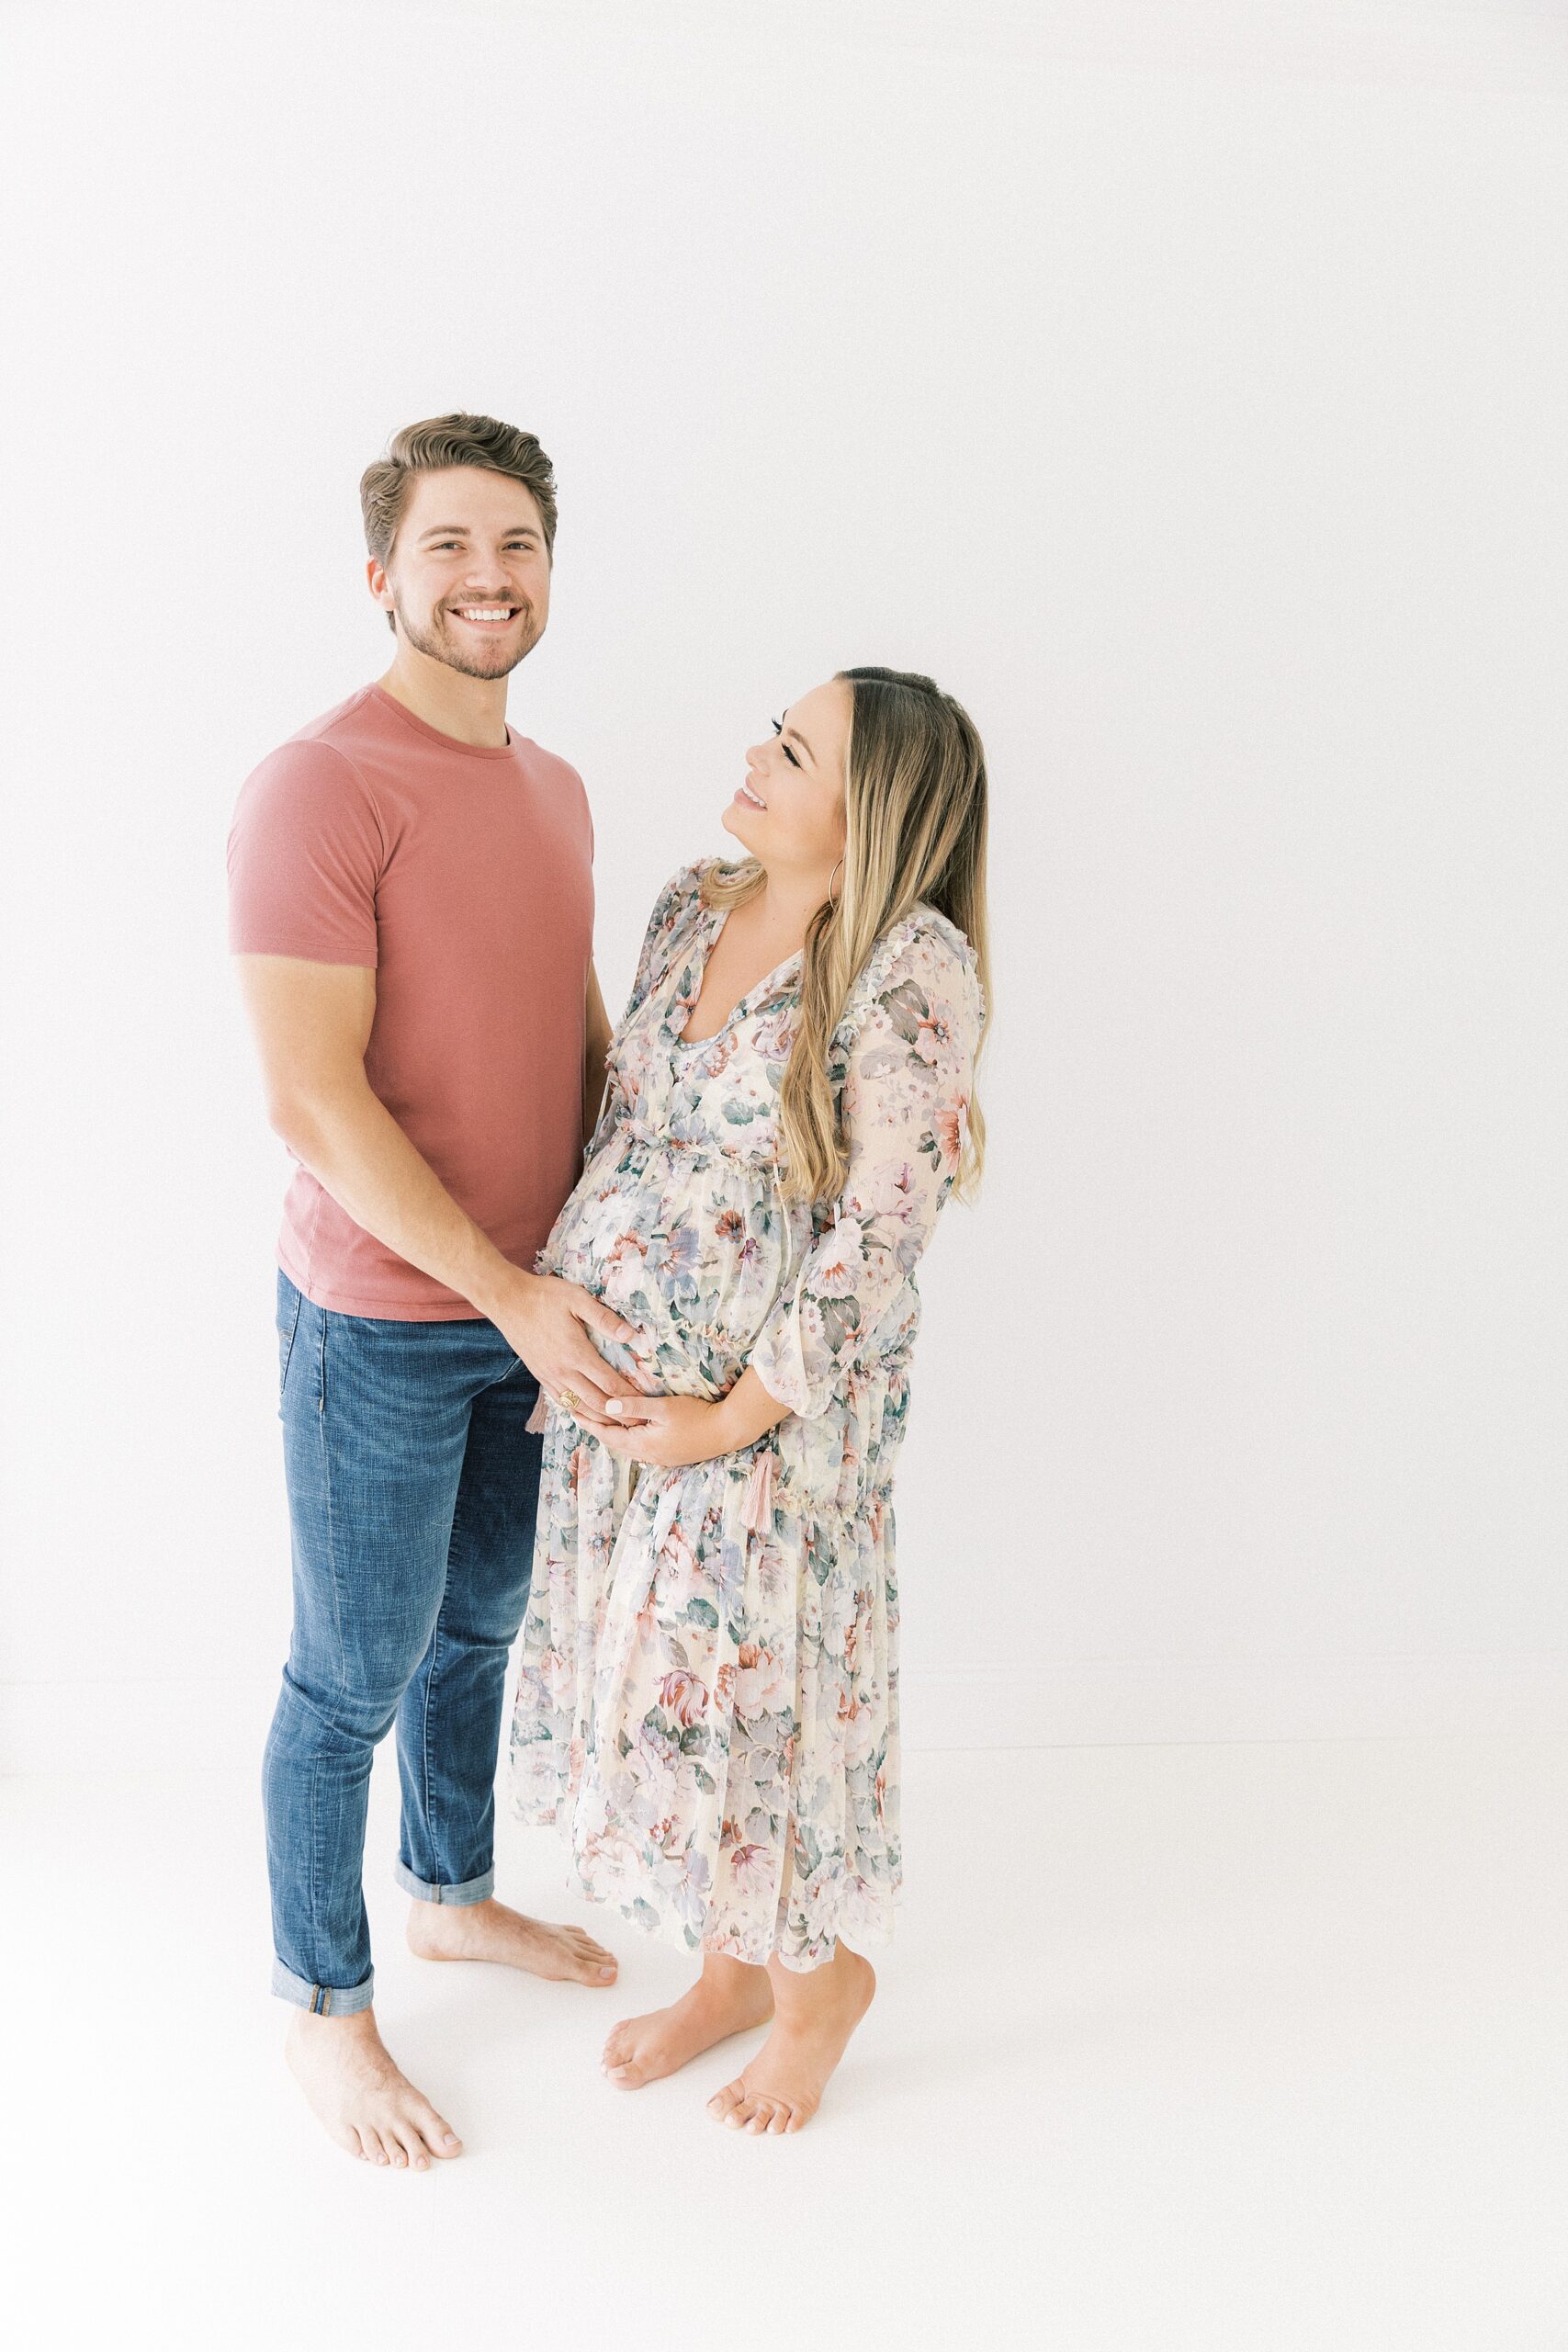 A mother to be in a floral print dress holds her bump with her husband while standing in a studio